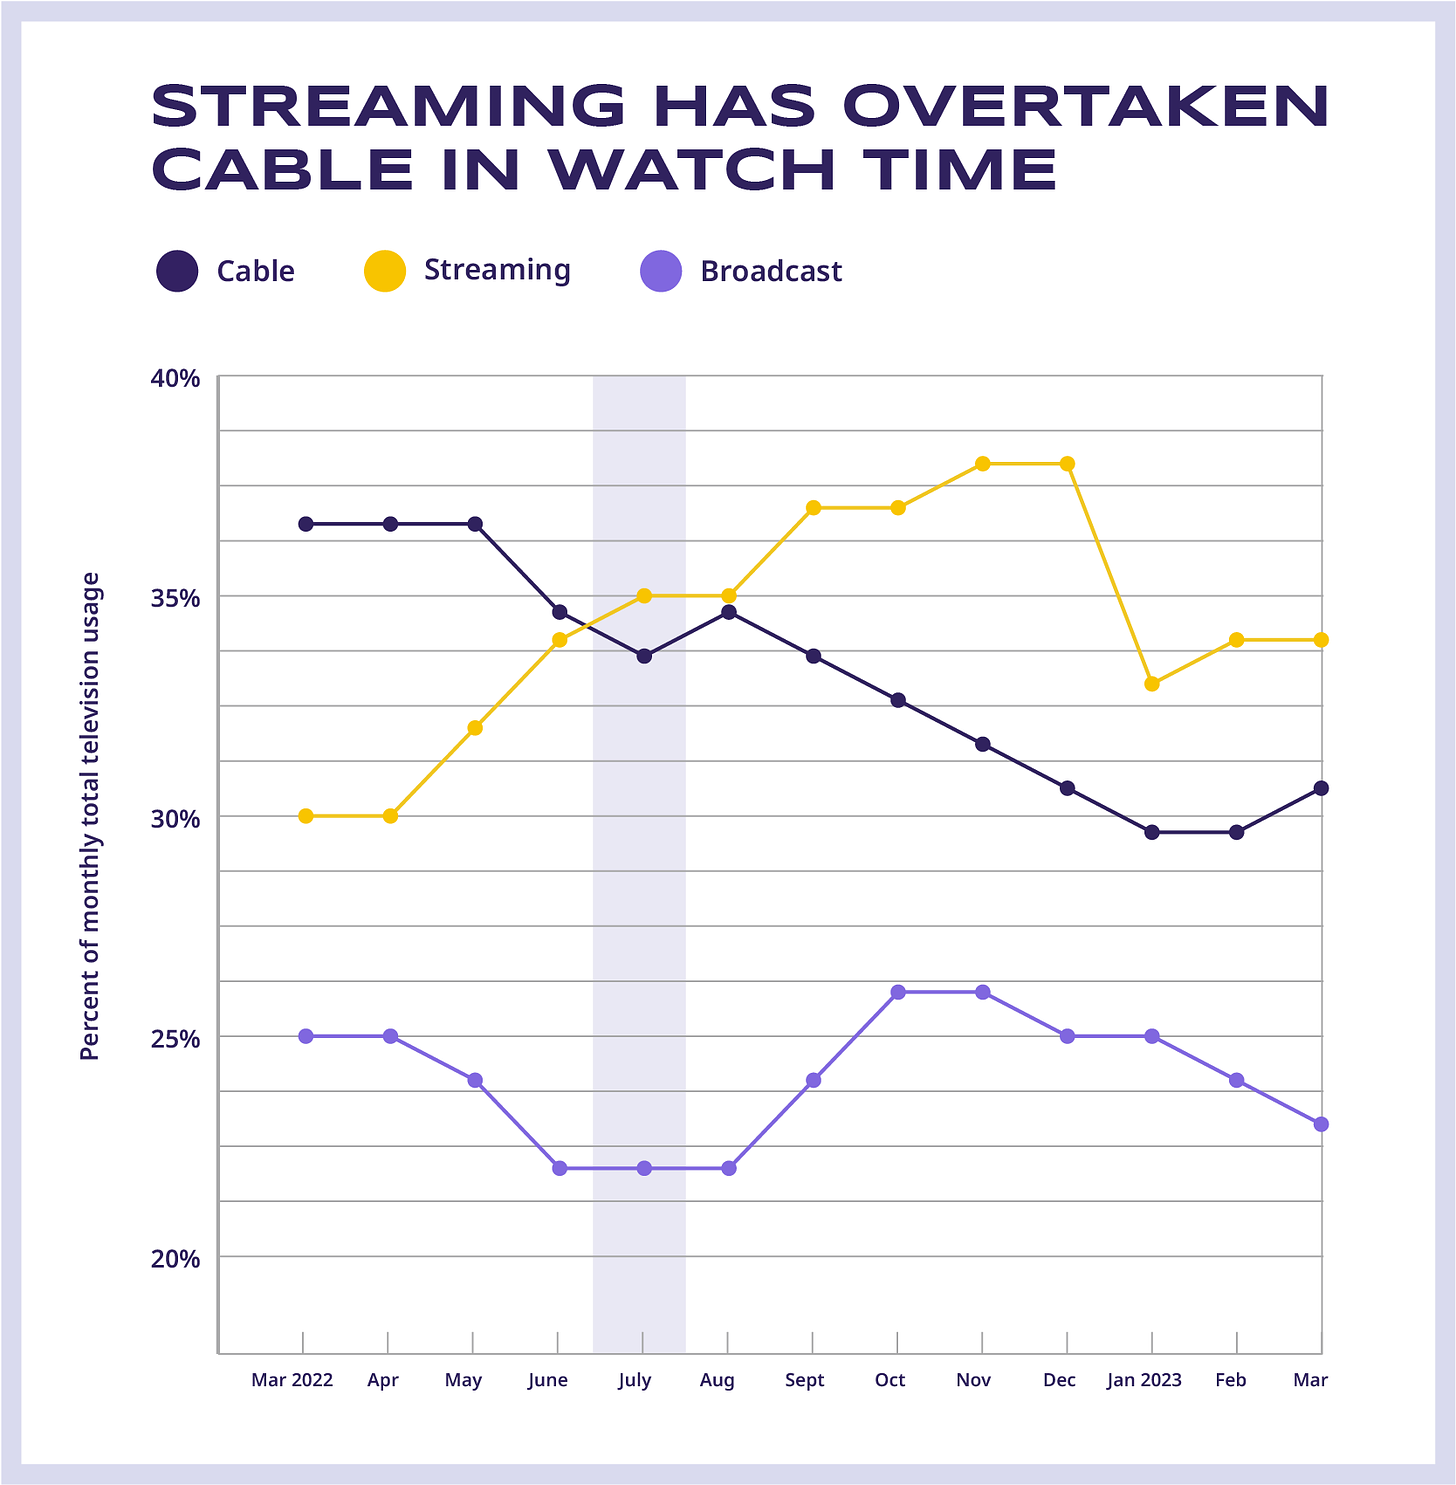 Data visualization showing the percent of monthly total television usage split between cable, streaming, and broadcast.